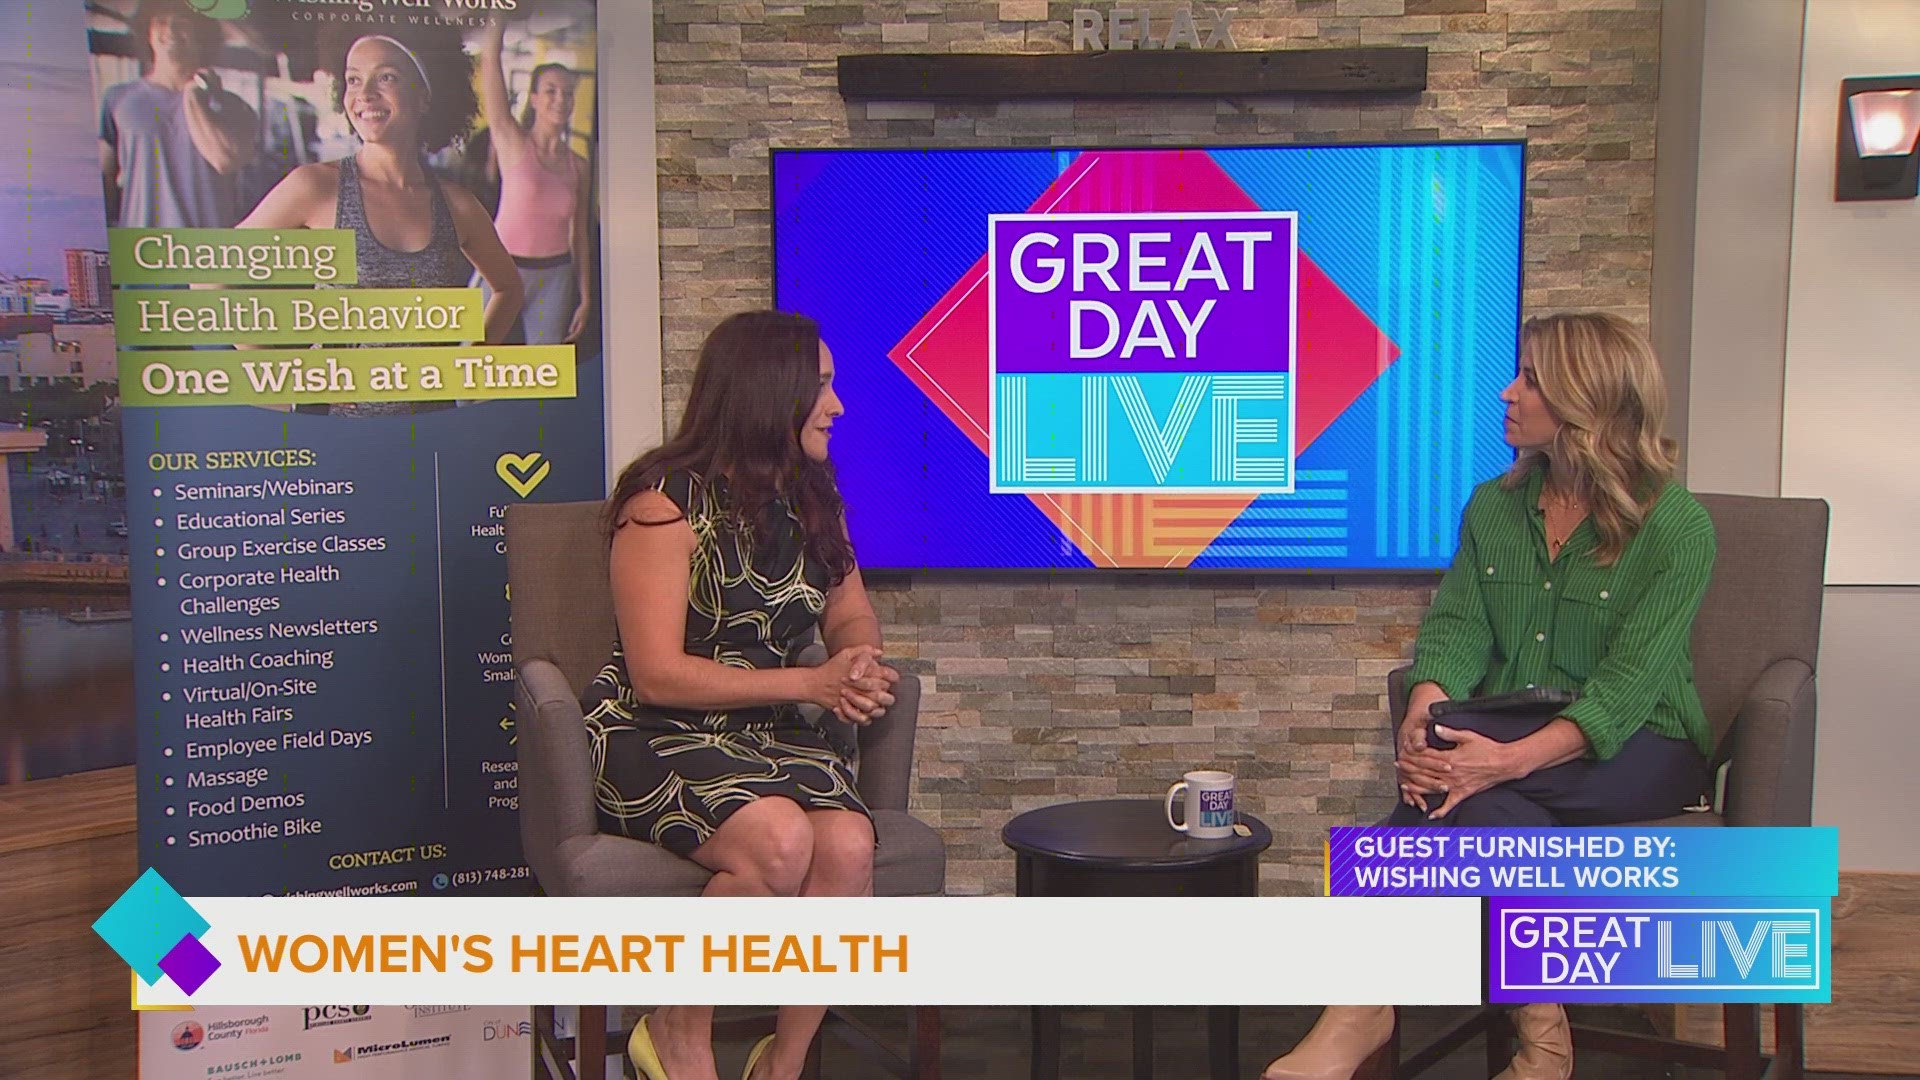 Michelle Williams joined GDL to talk about the importance of spreading awareness of women’s heart health.